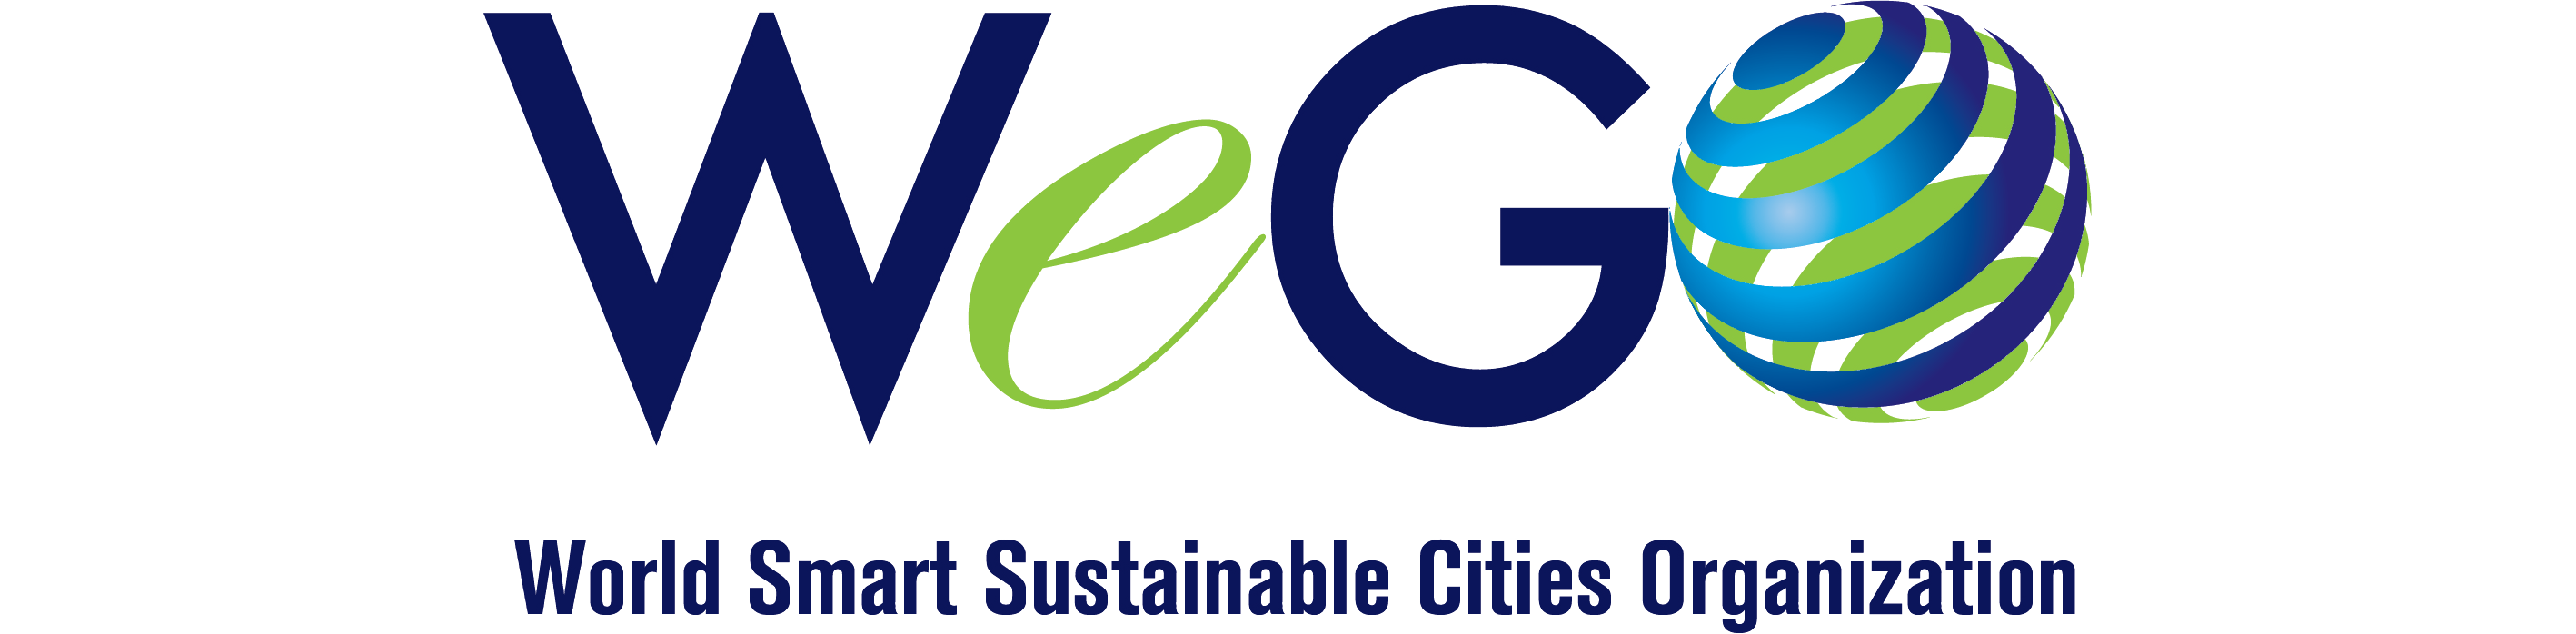 World e-Governments Organization of Cities and Local Governments – WeGO